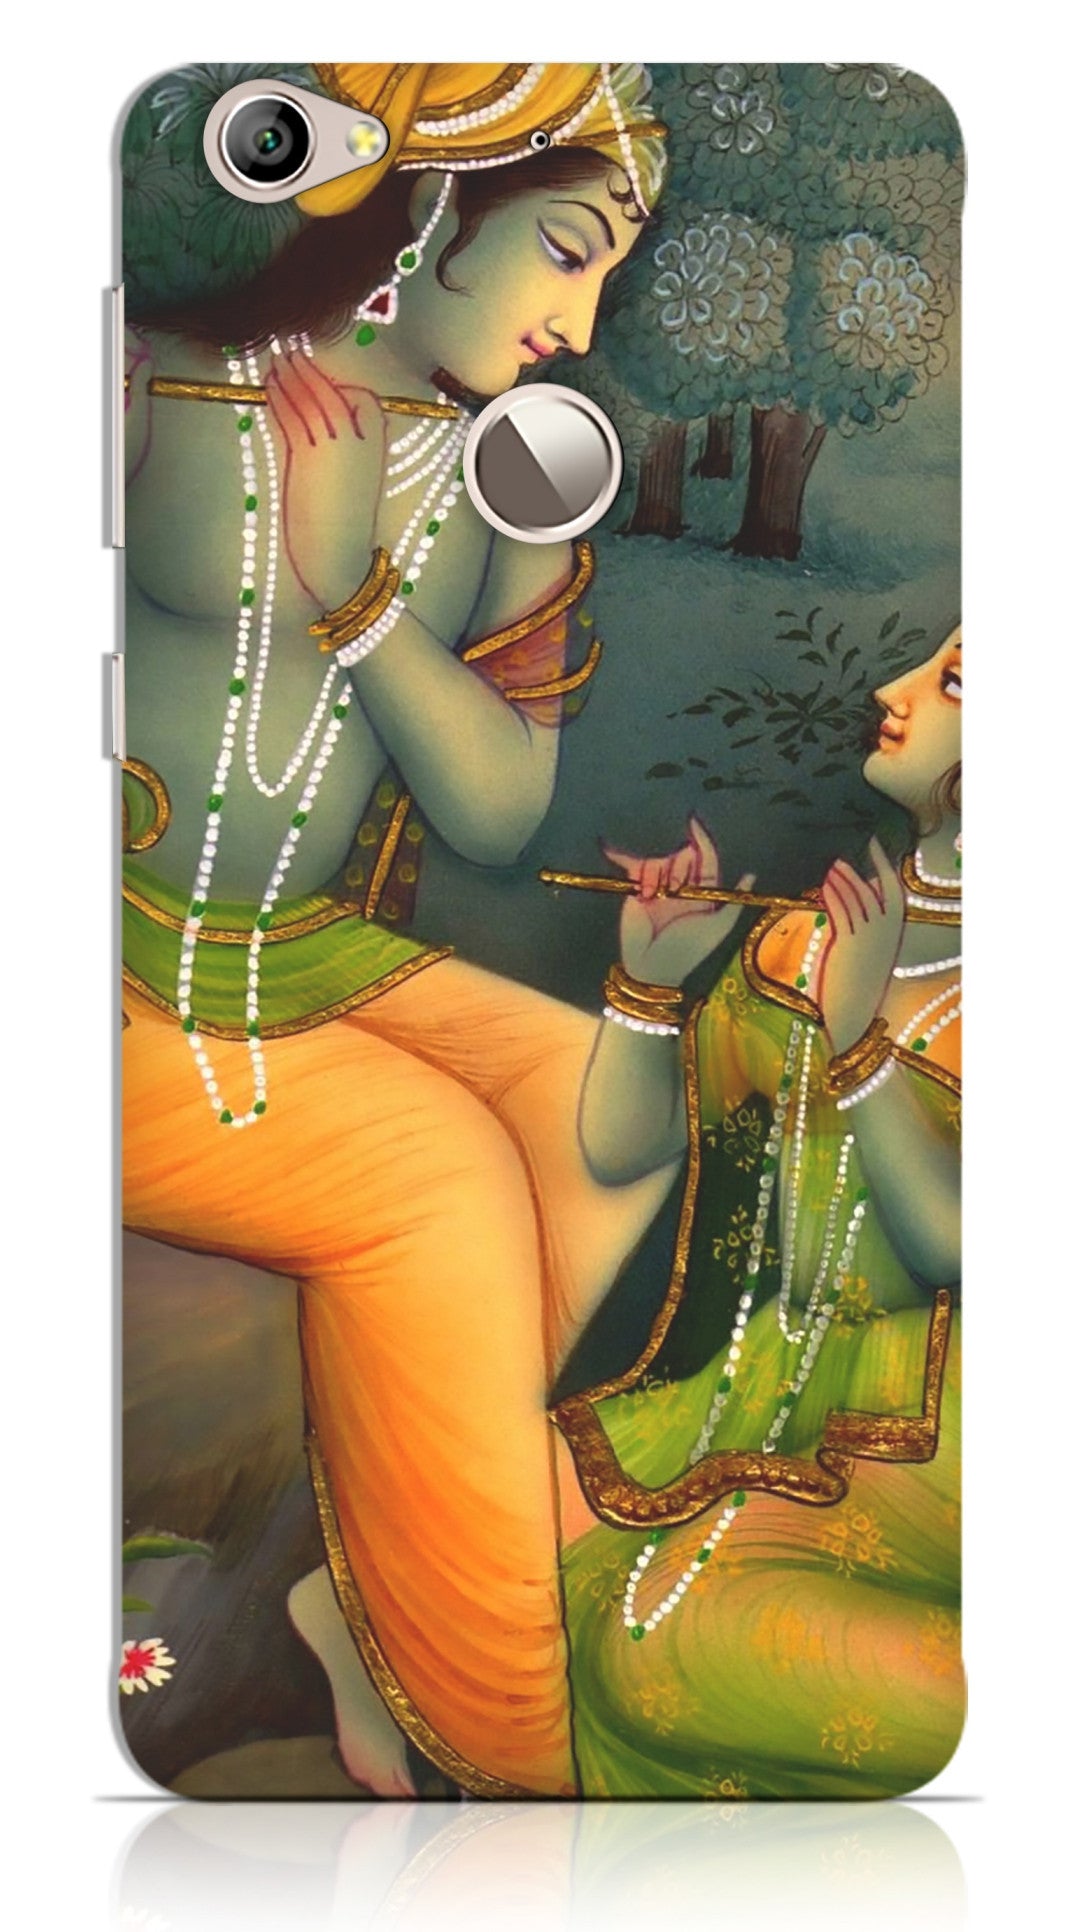 LORD RADHA KRISHNA DANCE POSE 3D Poster - Abstract posters in India - Buy  art, film, design, movie, music, nature and educational  paintings/wallpapers at Flipkart.com